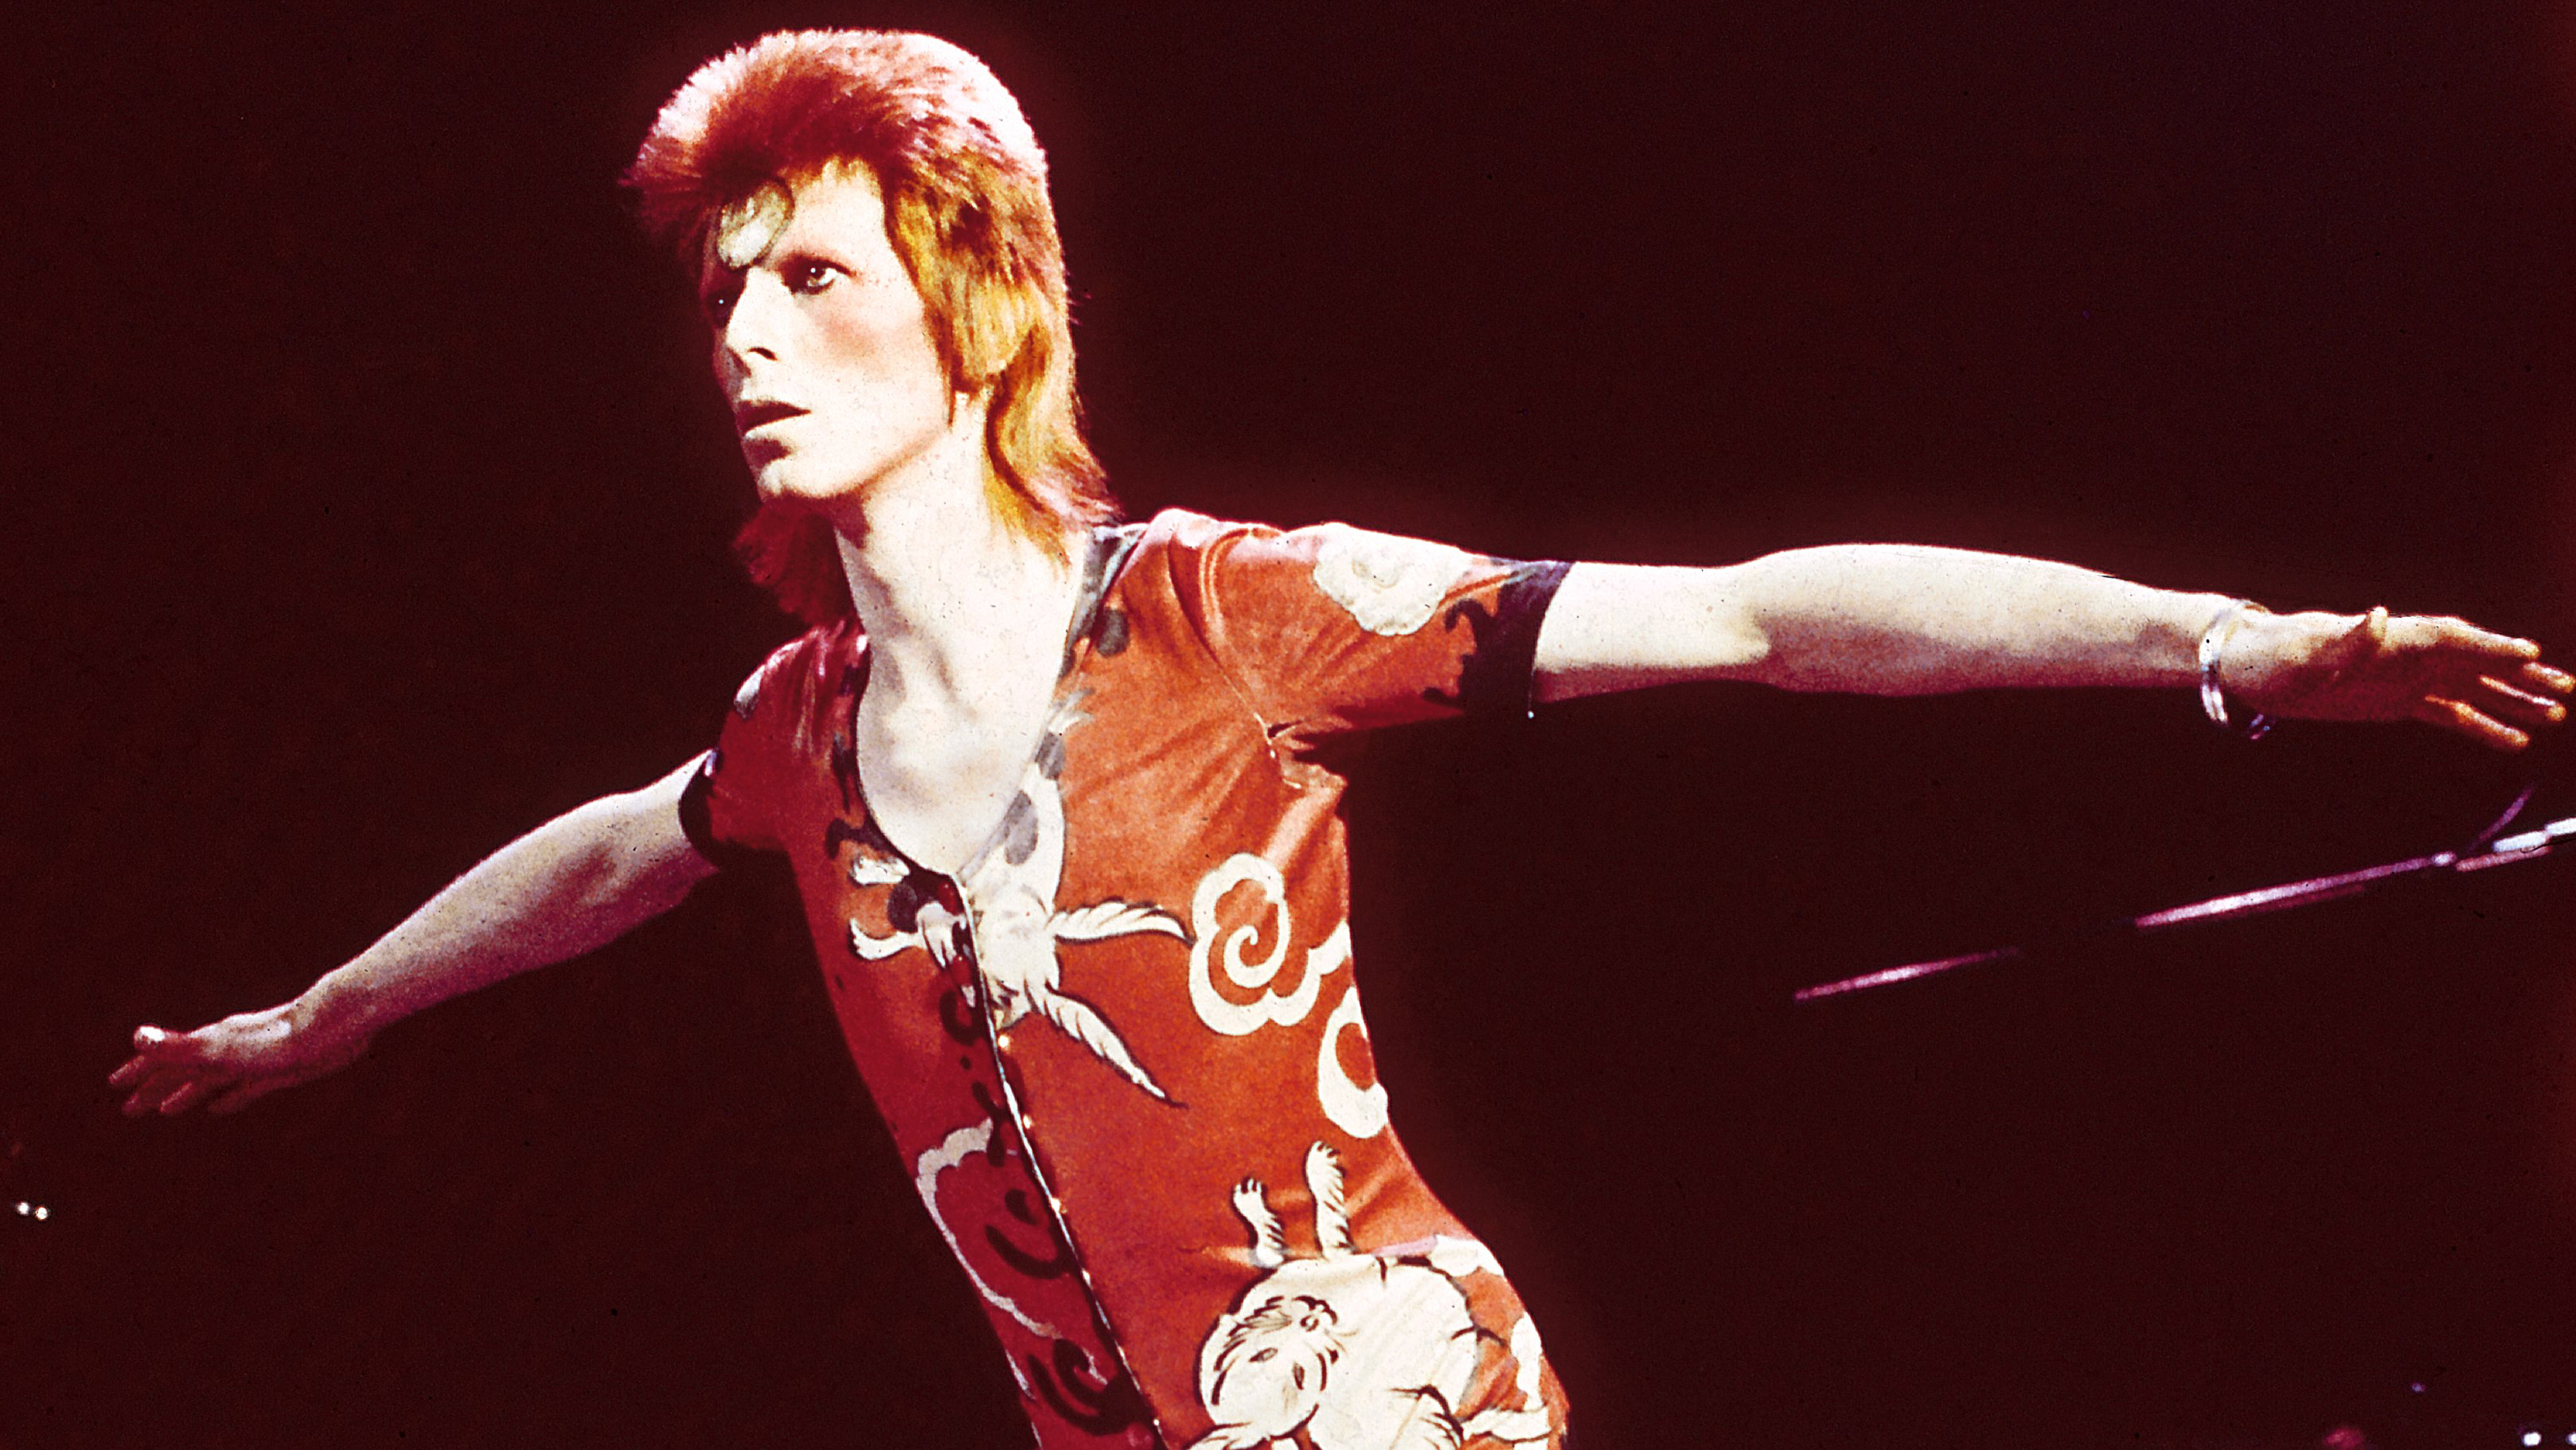 David Bowie Wallpaper High Resolution And Quality